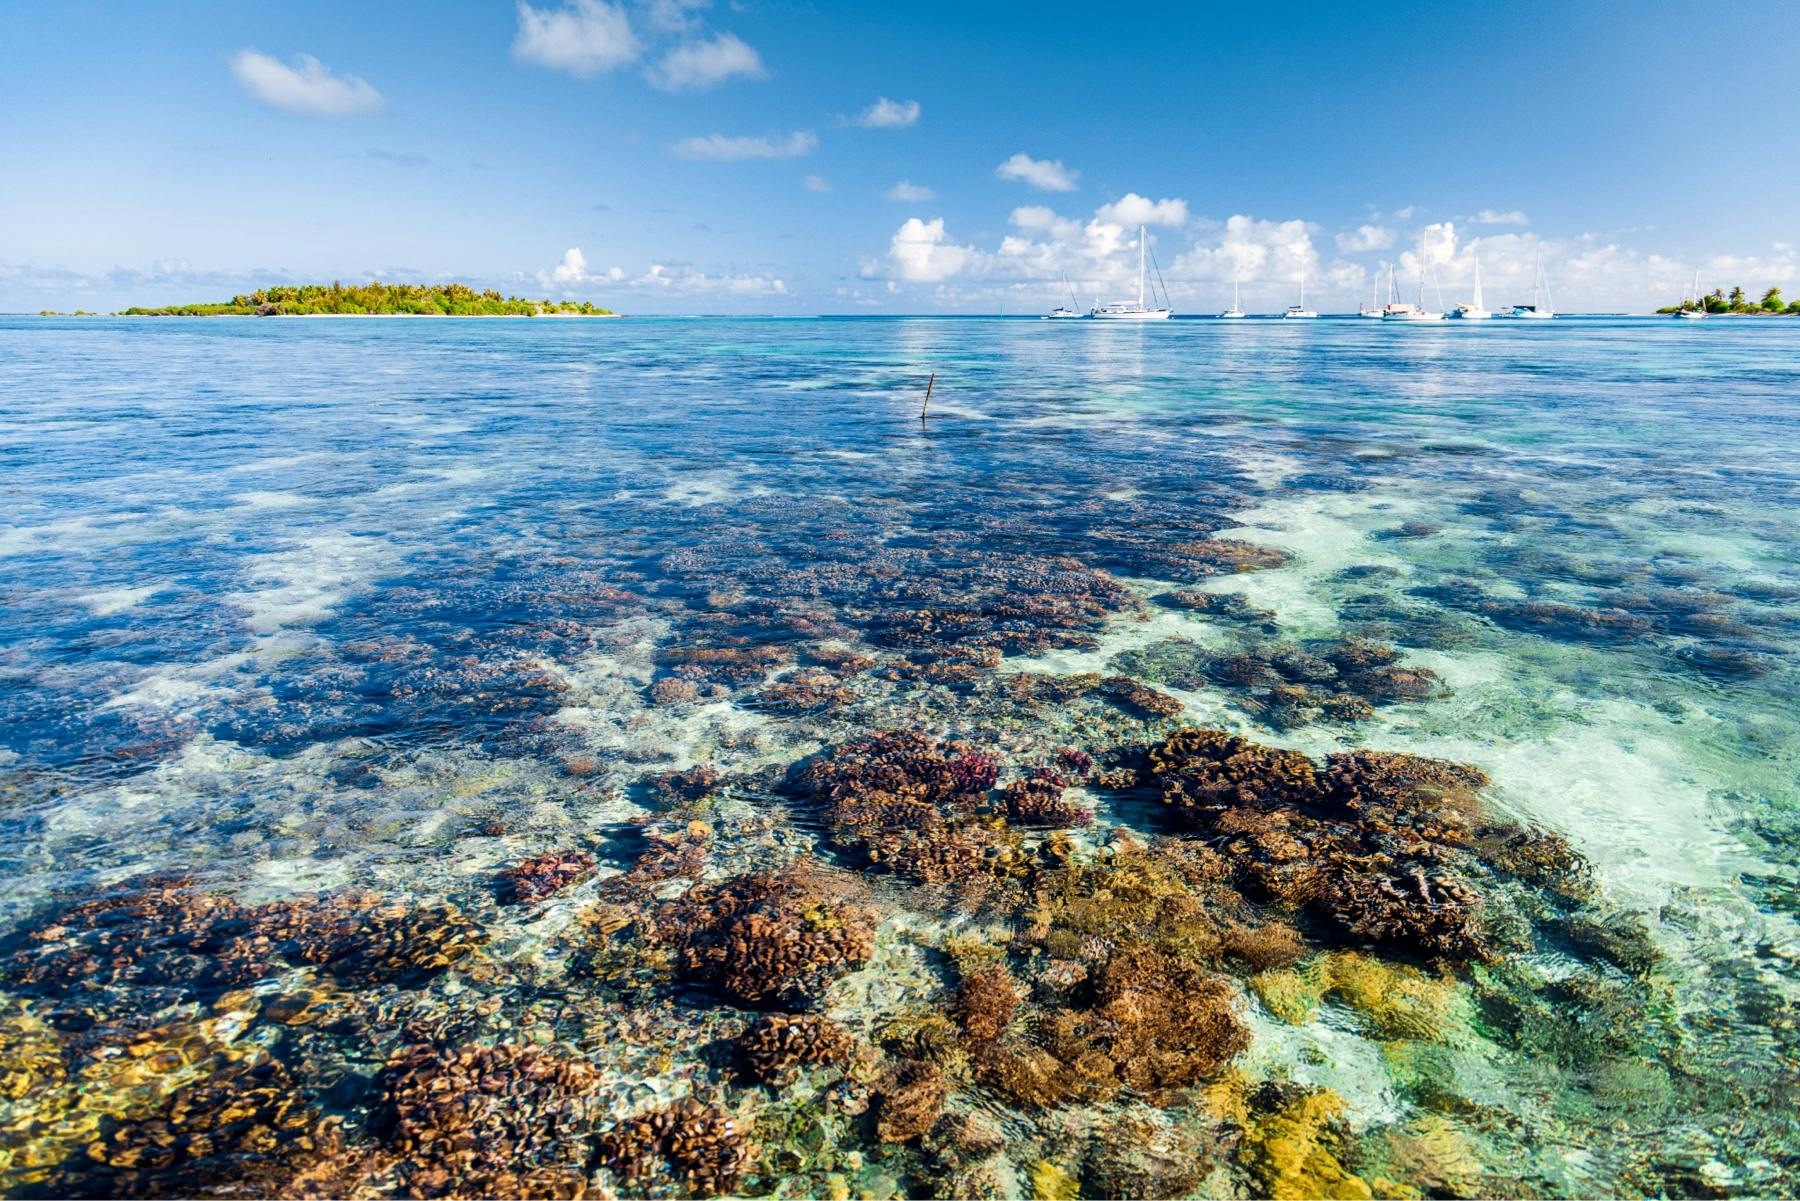 Coral and other sea life underwater with yachts in the distance above water in the Tuamoto Achipelago photo by Ryan Chachi Craig